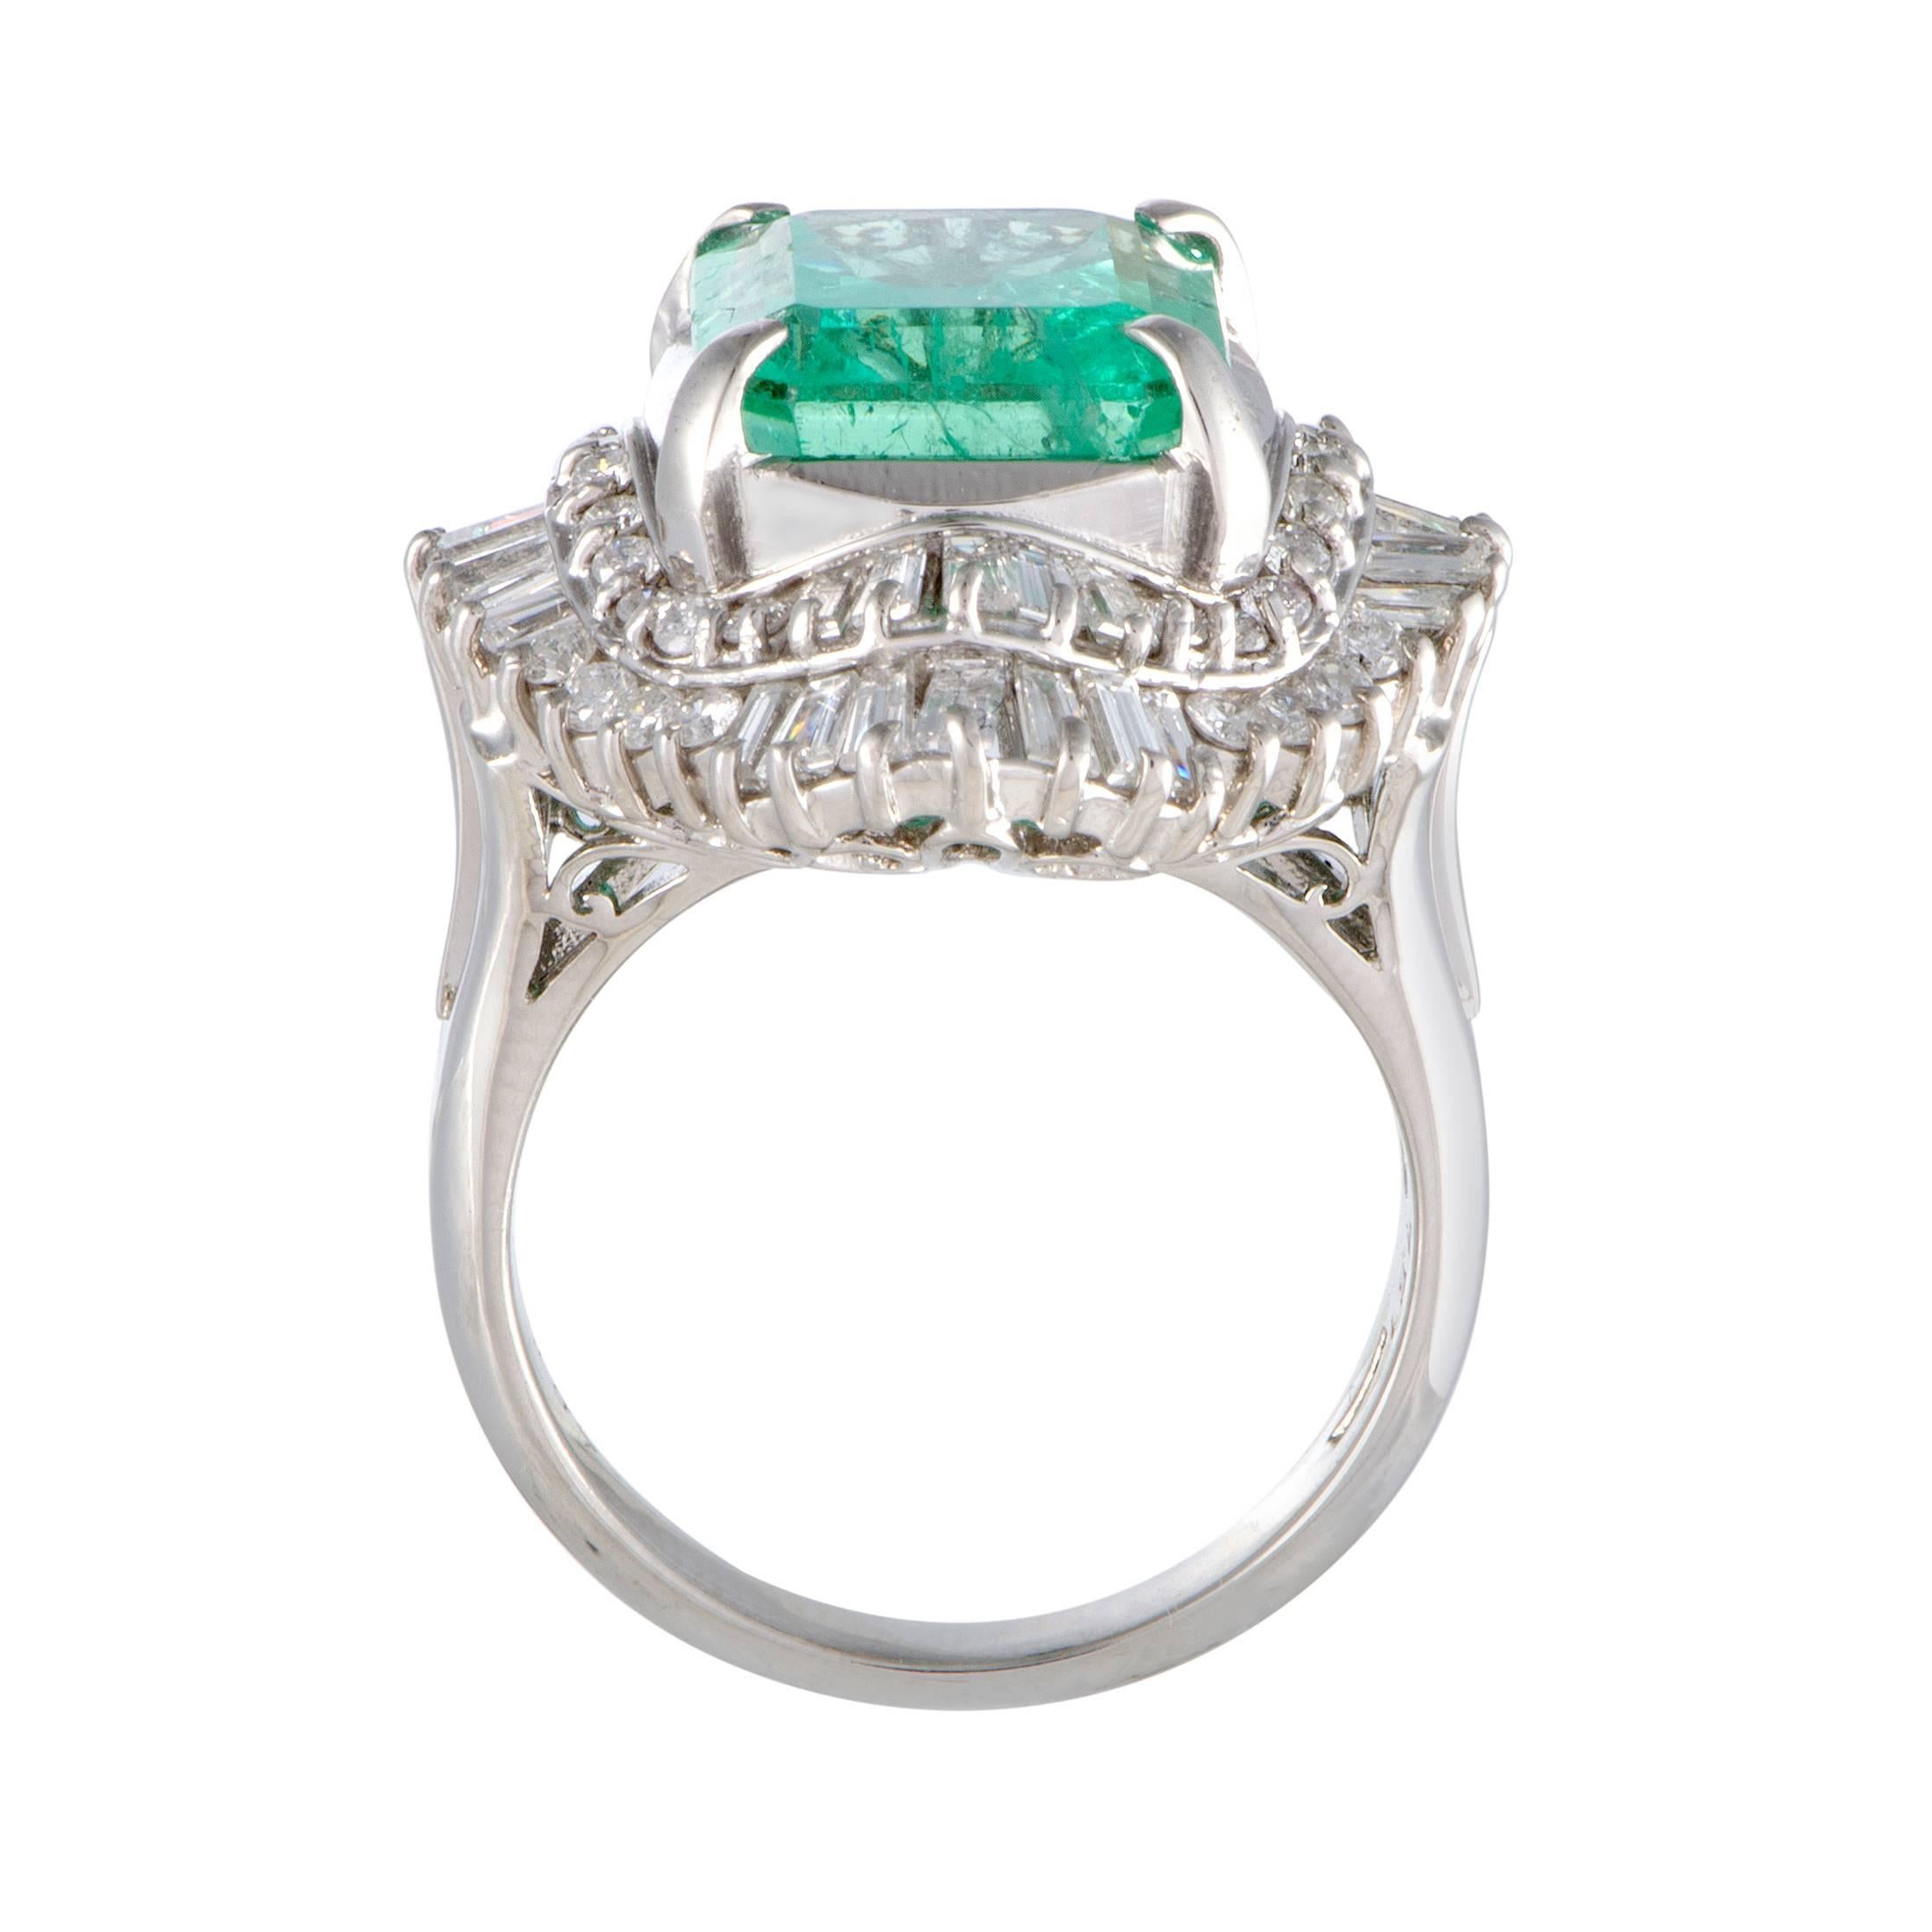 Harmoniously combined, the endearingly bright tones of emerald and diamonds give a sublime aesthetic appeal to this stunning ring made of platinum. The emerald weighs astounding 7.51 carats and it is surrounded with 2.10 carats of resplendent